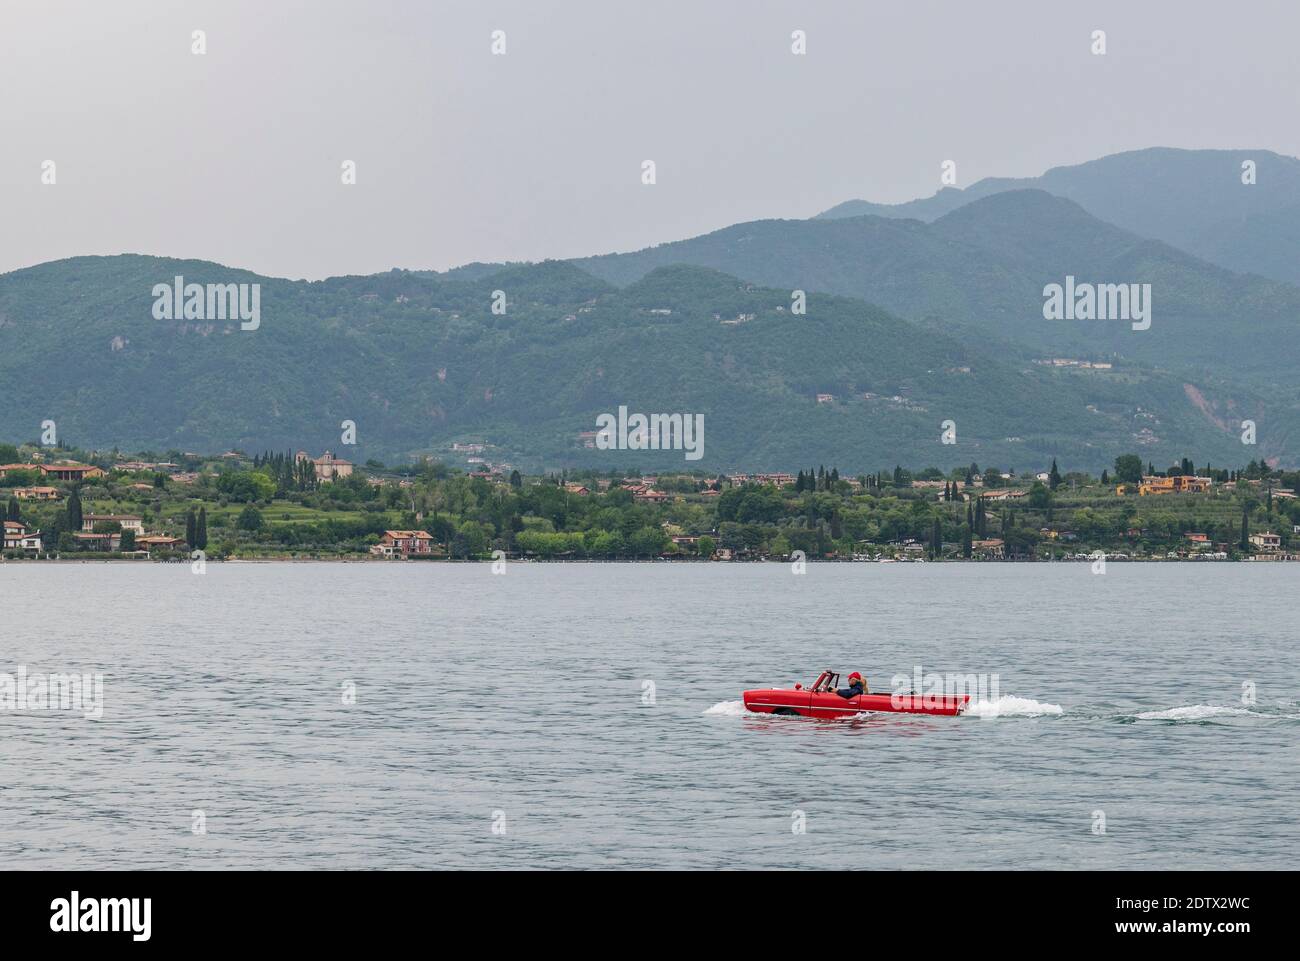 Scenic View Of Lake Against Mountains Stock Photo